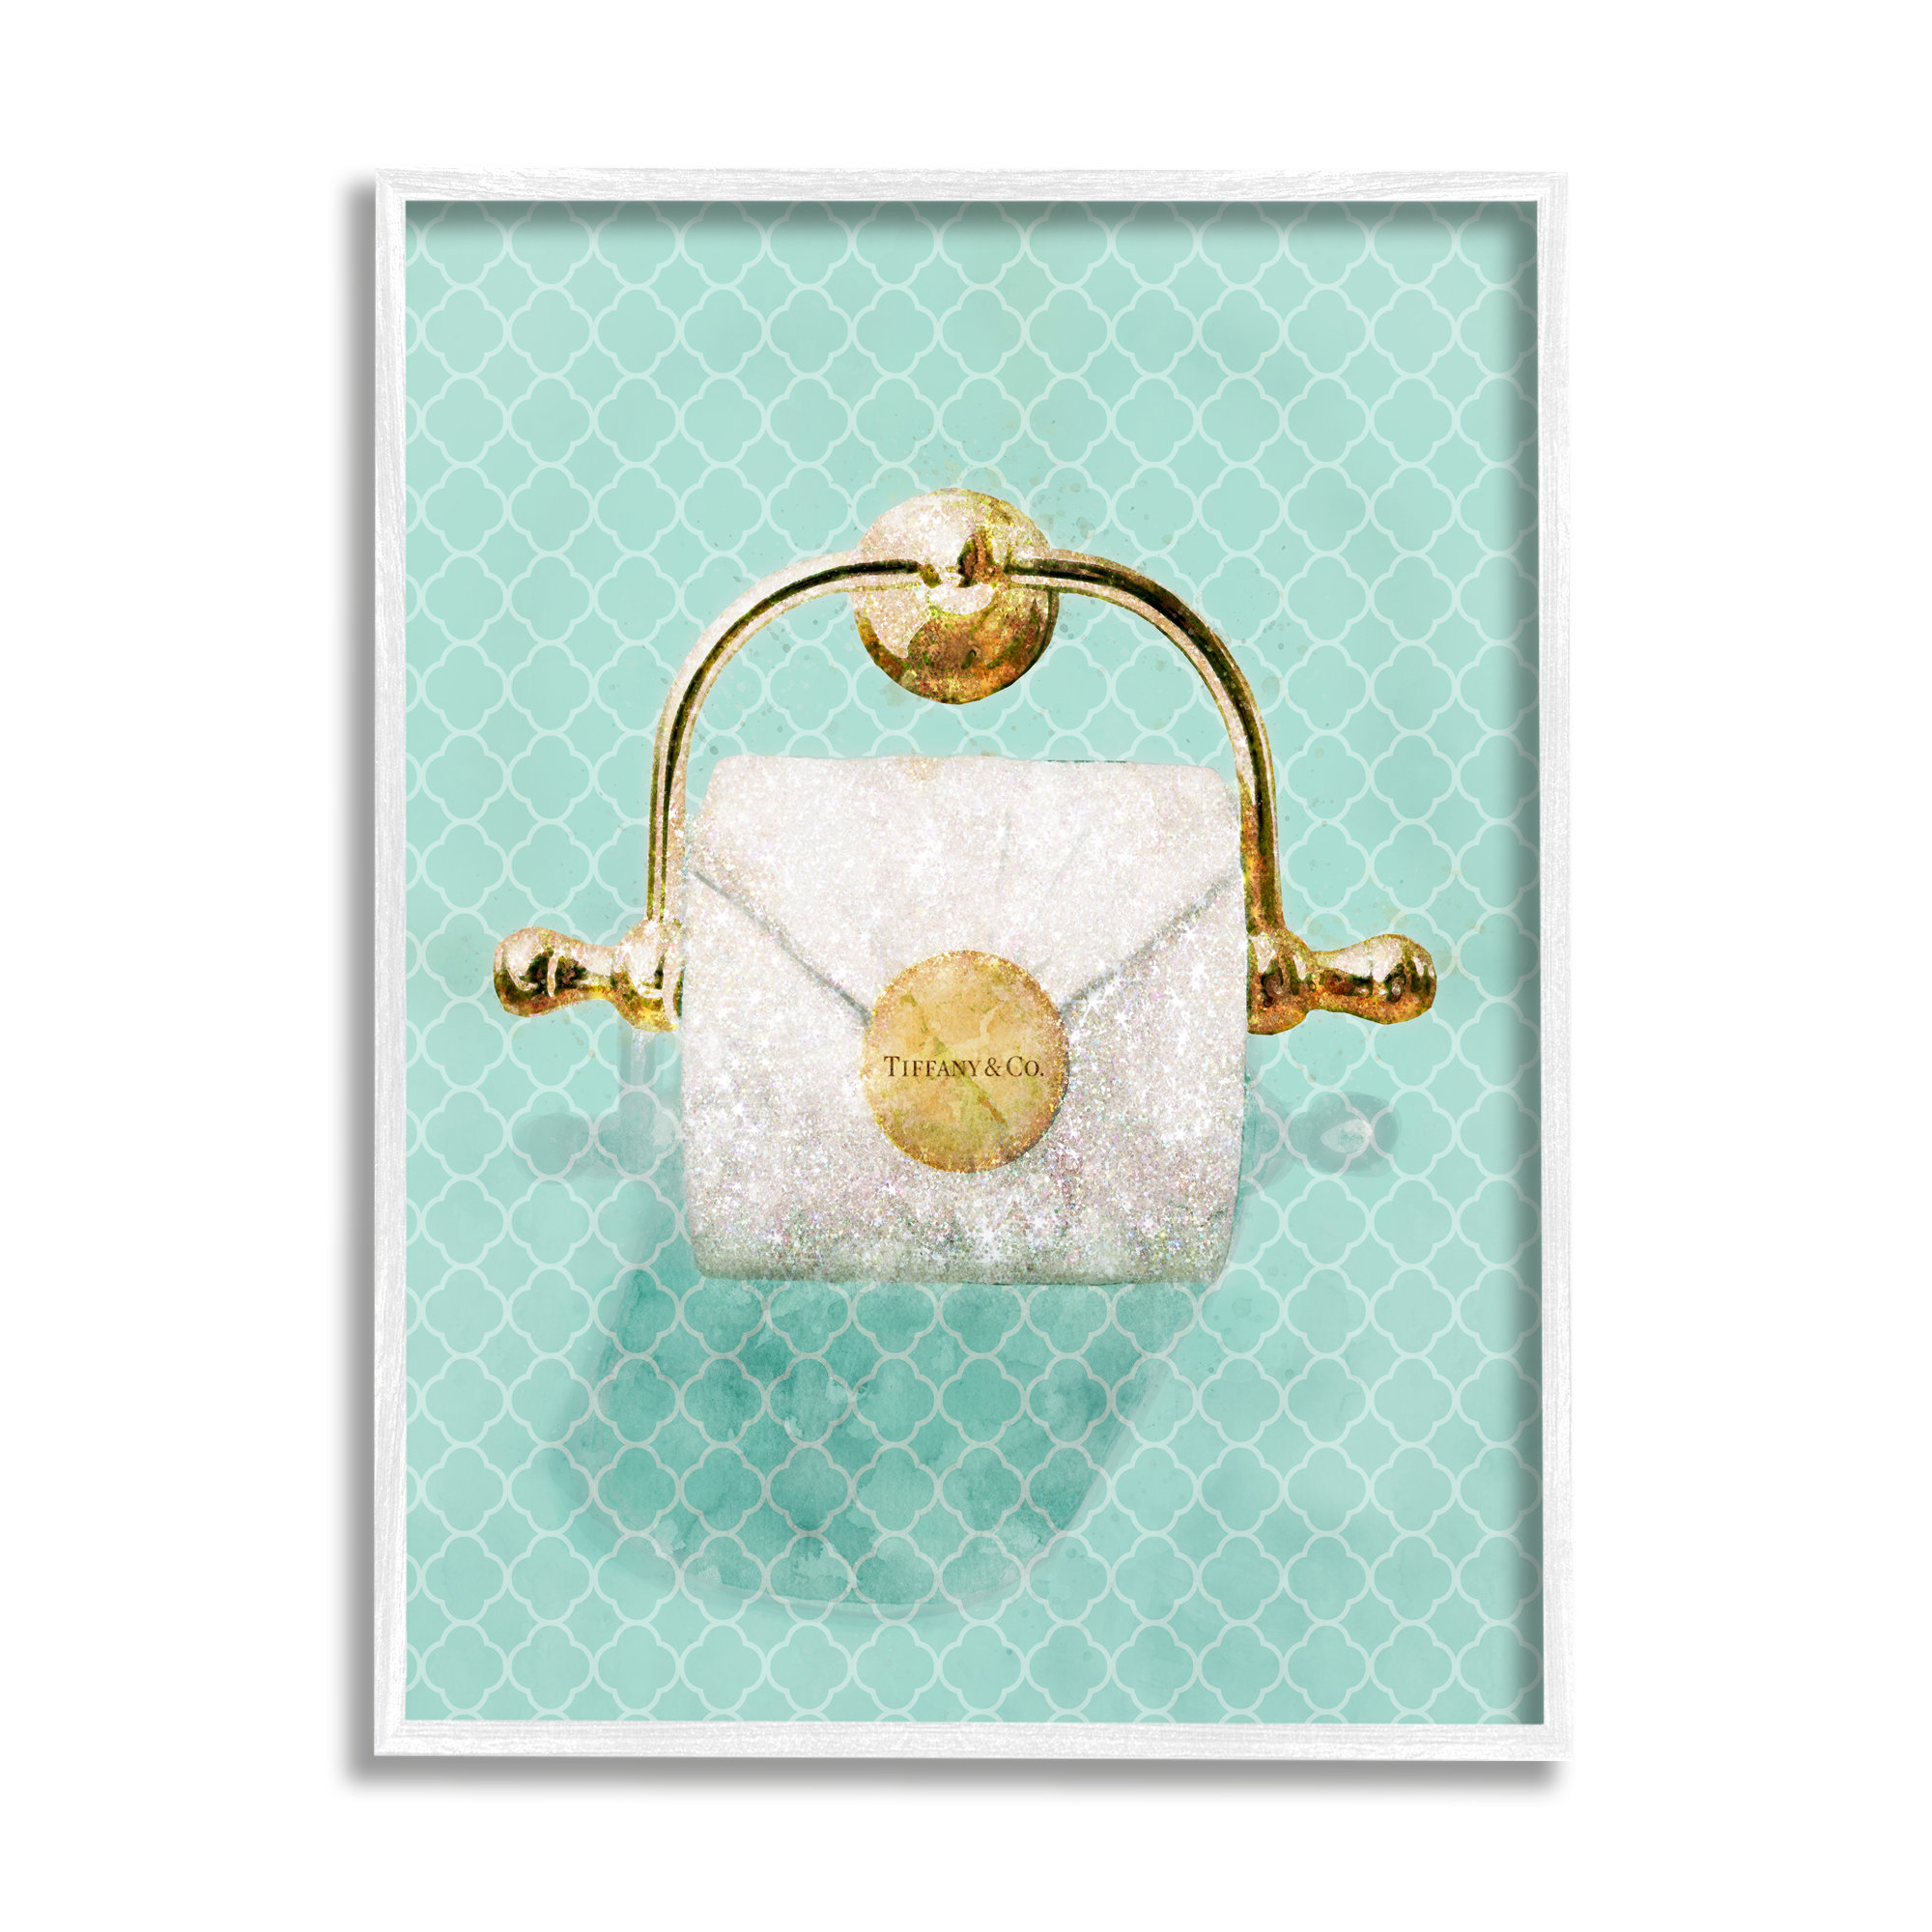 Oliver Gal Fashion Toilet De Luxe Gold Roll Canvas Print Wall Art on SALE